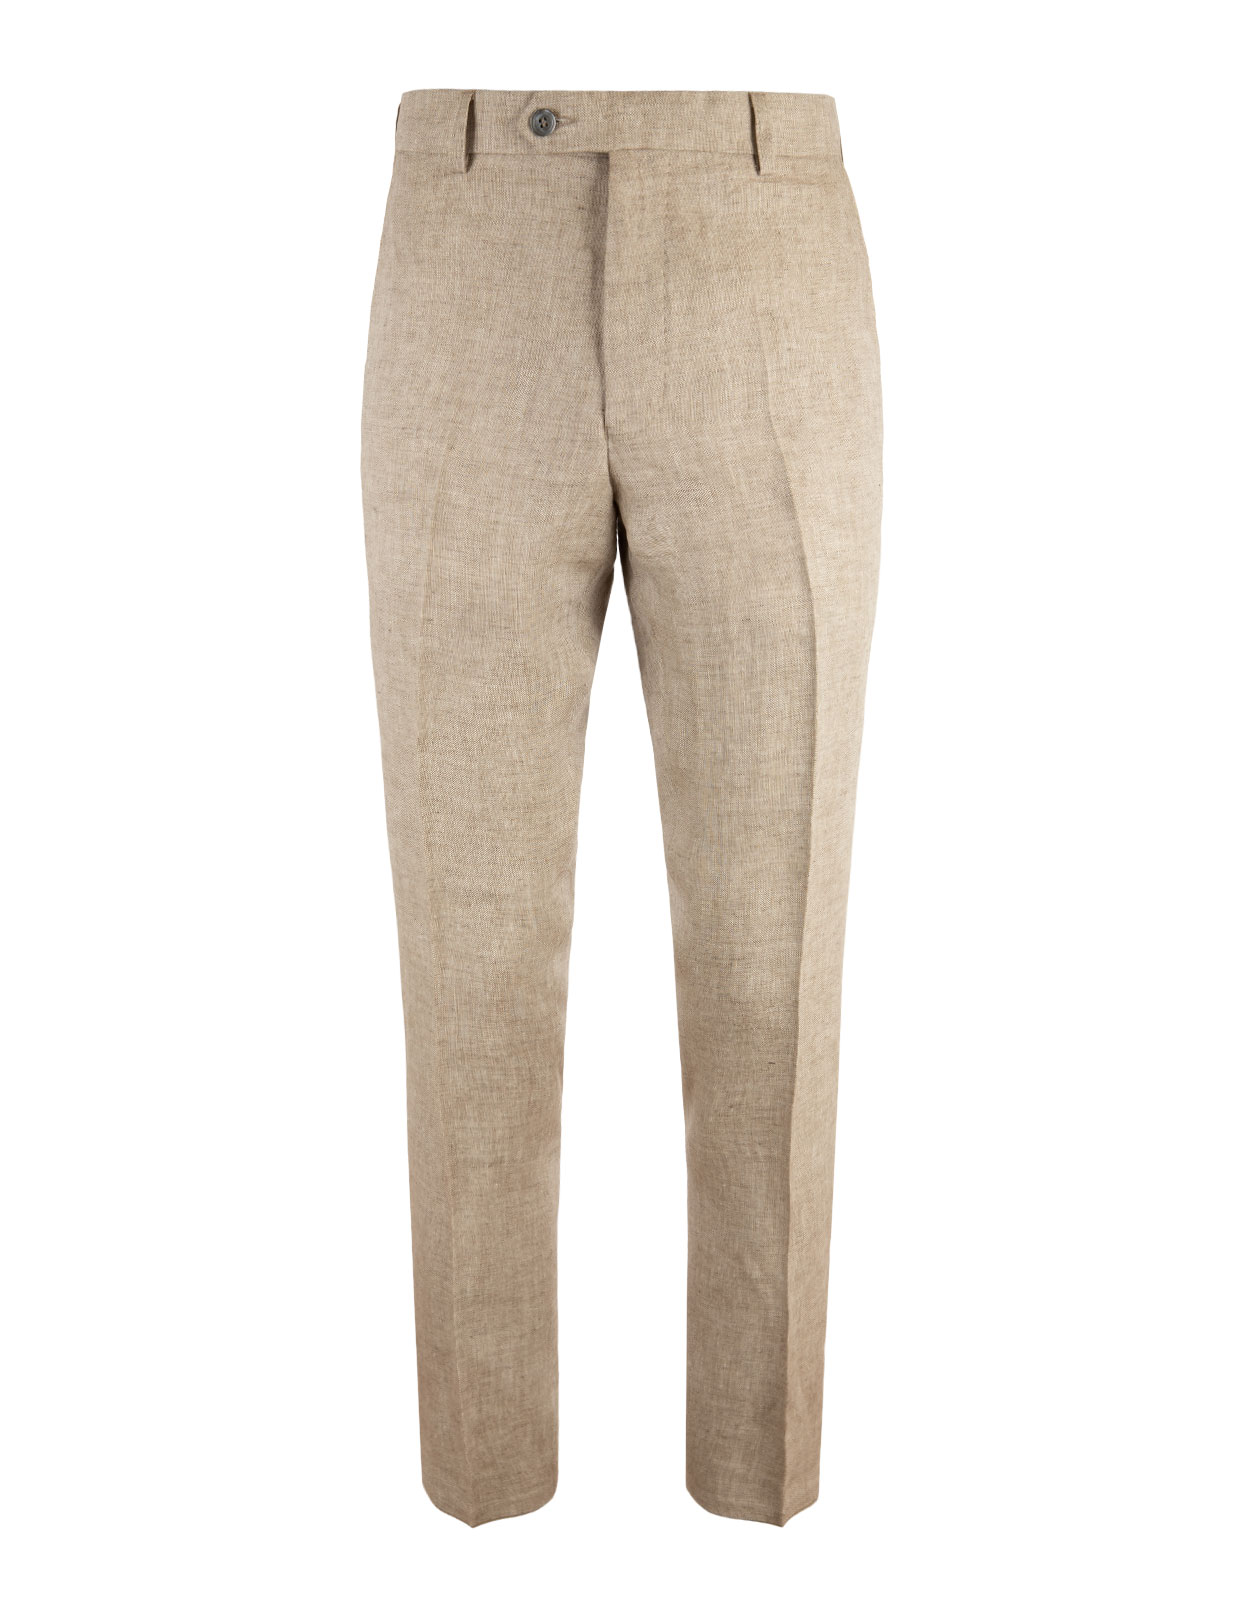 Denz Trousers Trench Beige Stl 150